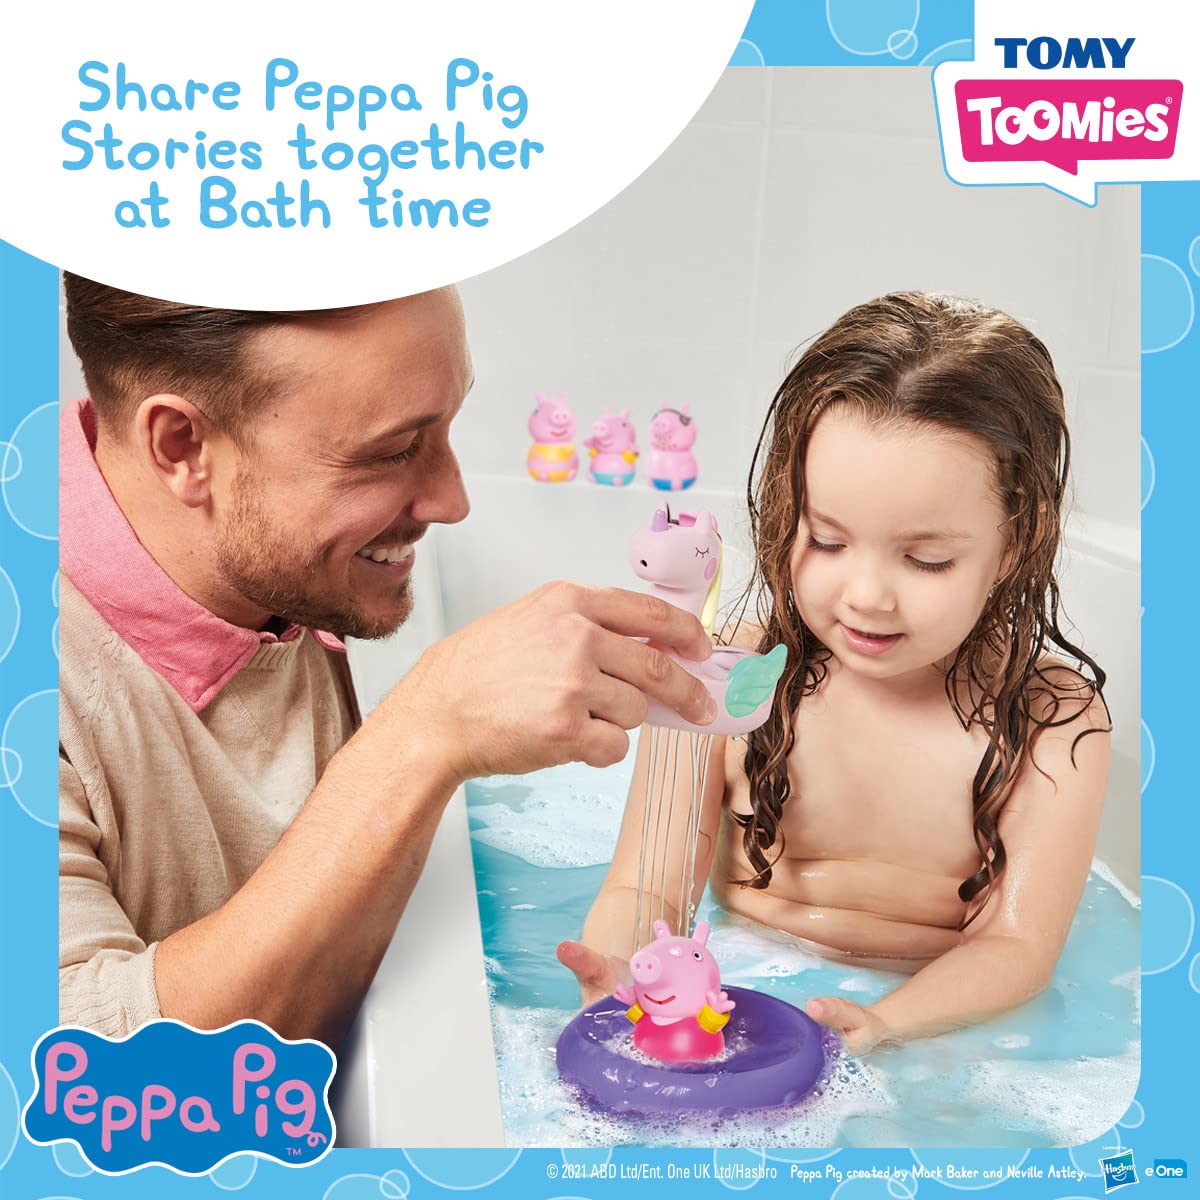 Peppa Pig Bath Toys – Baby Bath Toys Promote Dexterity and Motor Skills – Toddler Toys for Bath and Pool – Bath Squirties for Boys and Girls 18 Months and Up